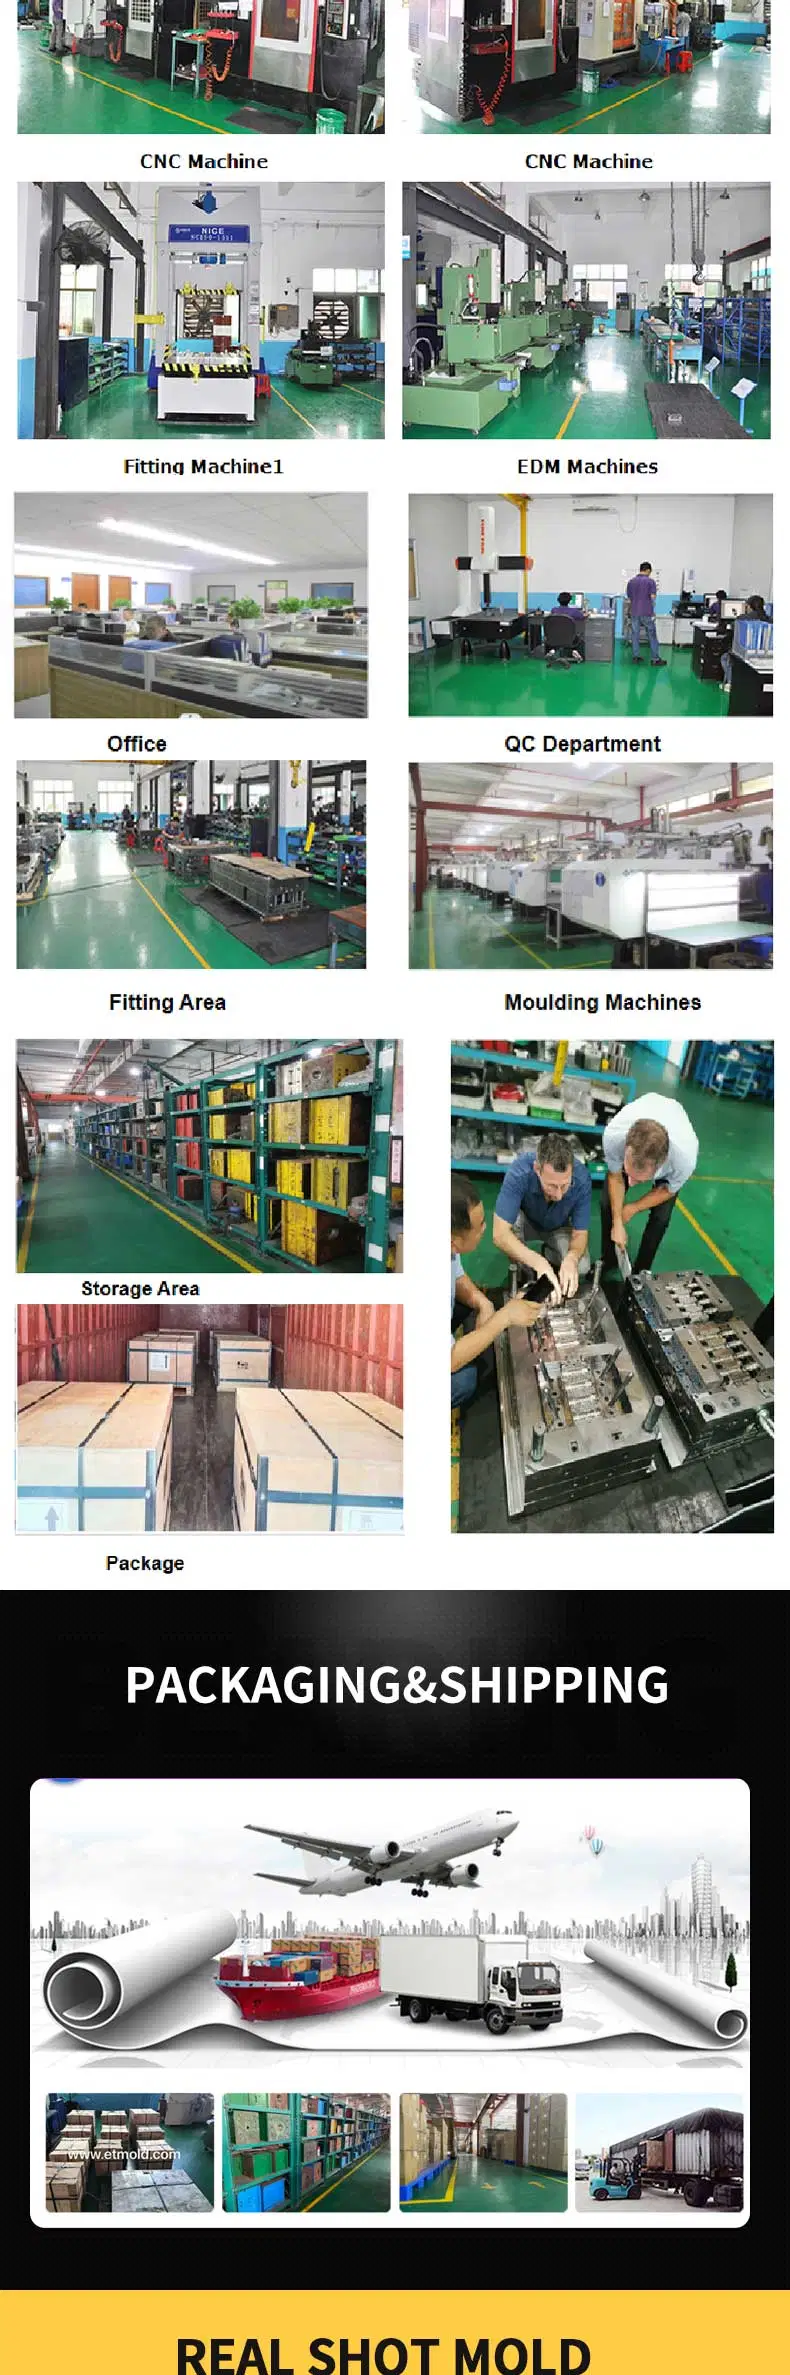 Plastic Injection Mold Moulding Companies Plastic Molding Business Medical Molding Companies Plastic Mould Maker for Plastic Parts Injection